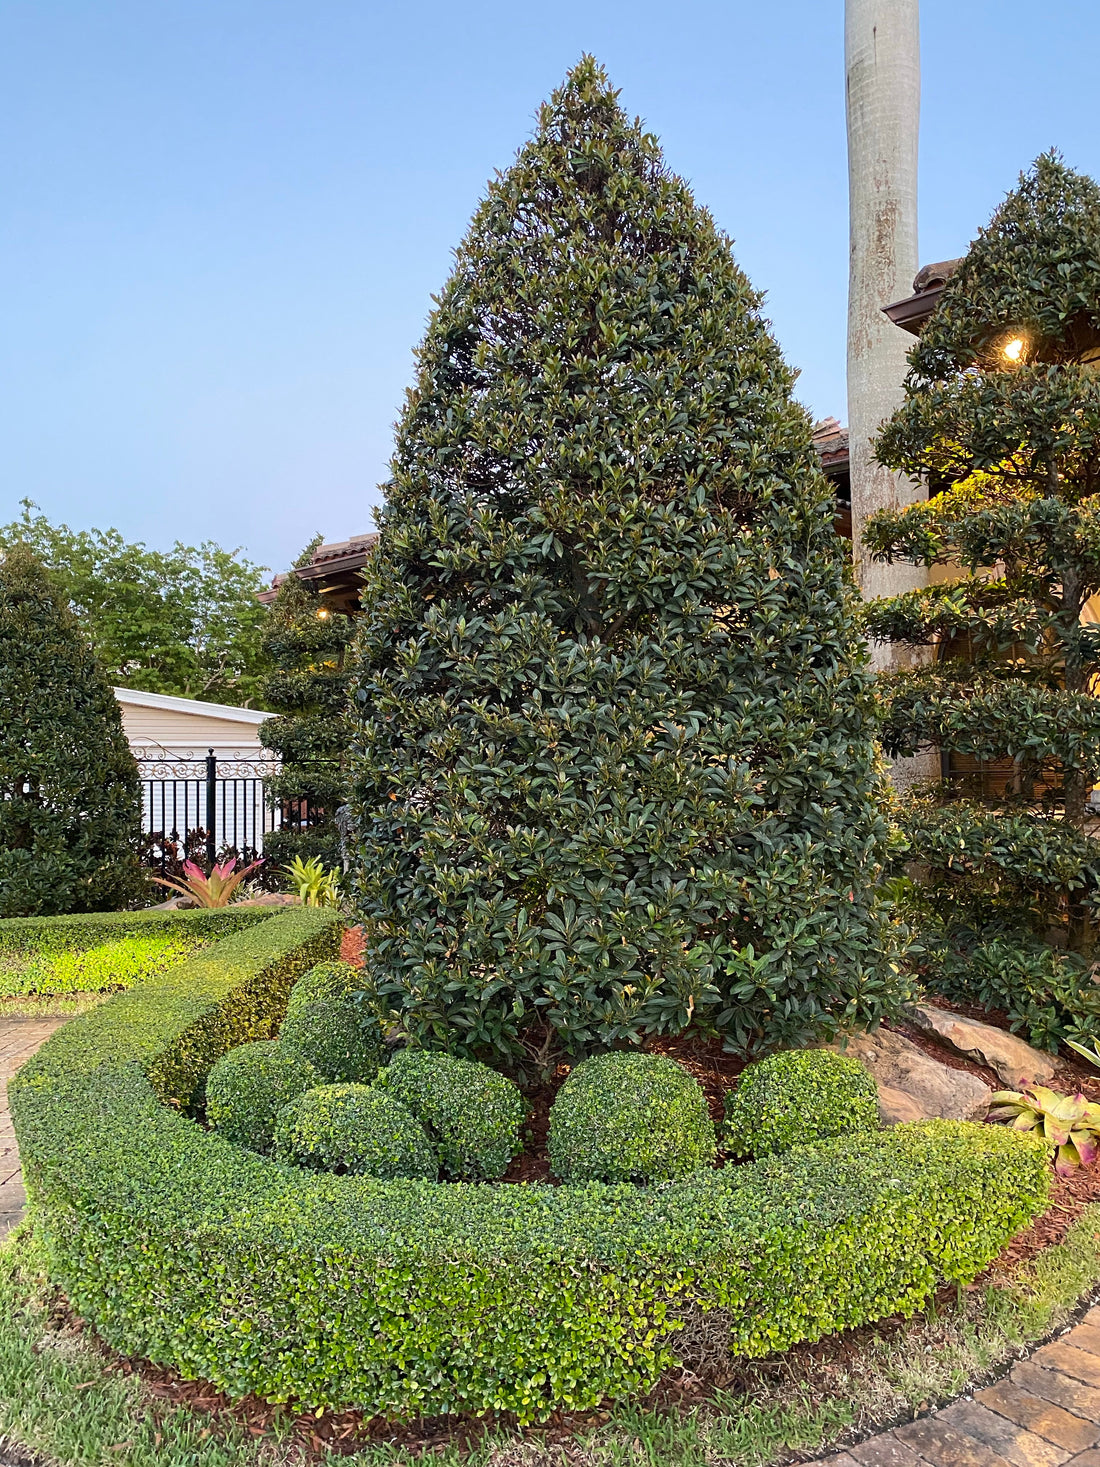 Topiary Cone Japanese Blueberry Tree